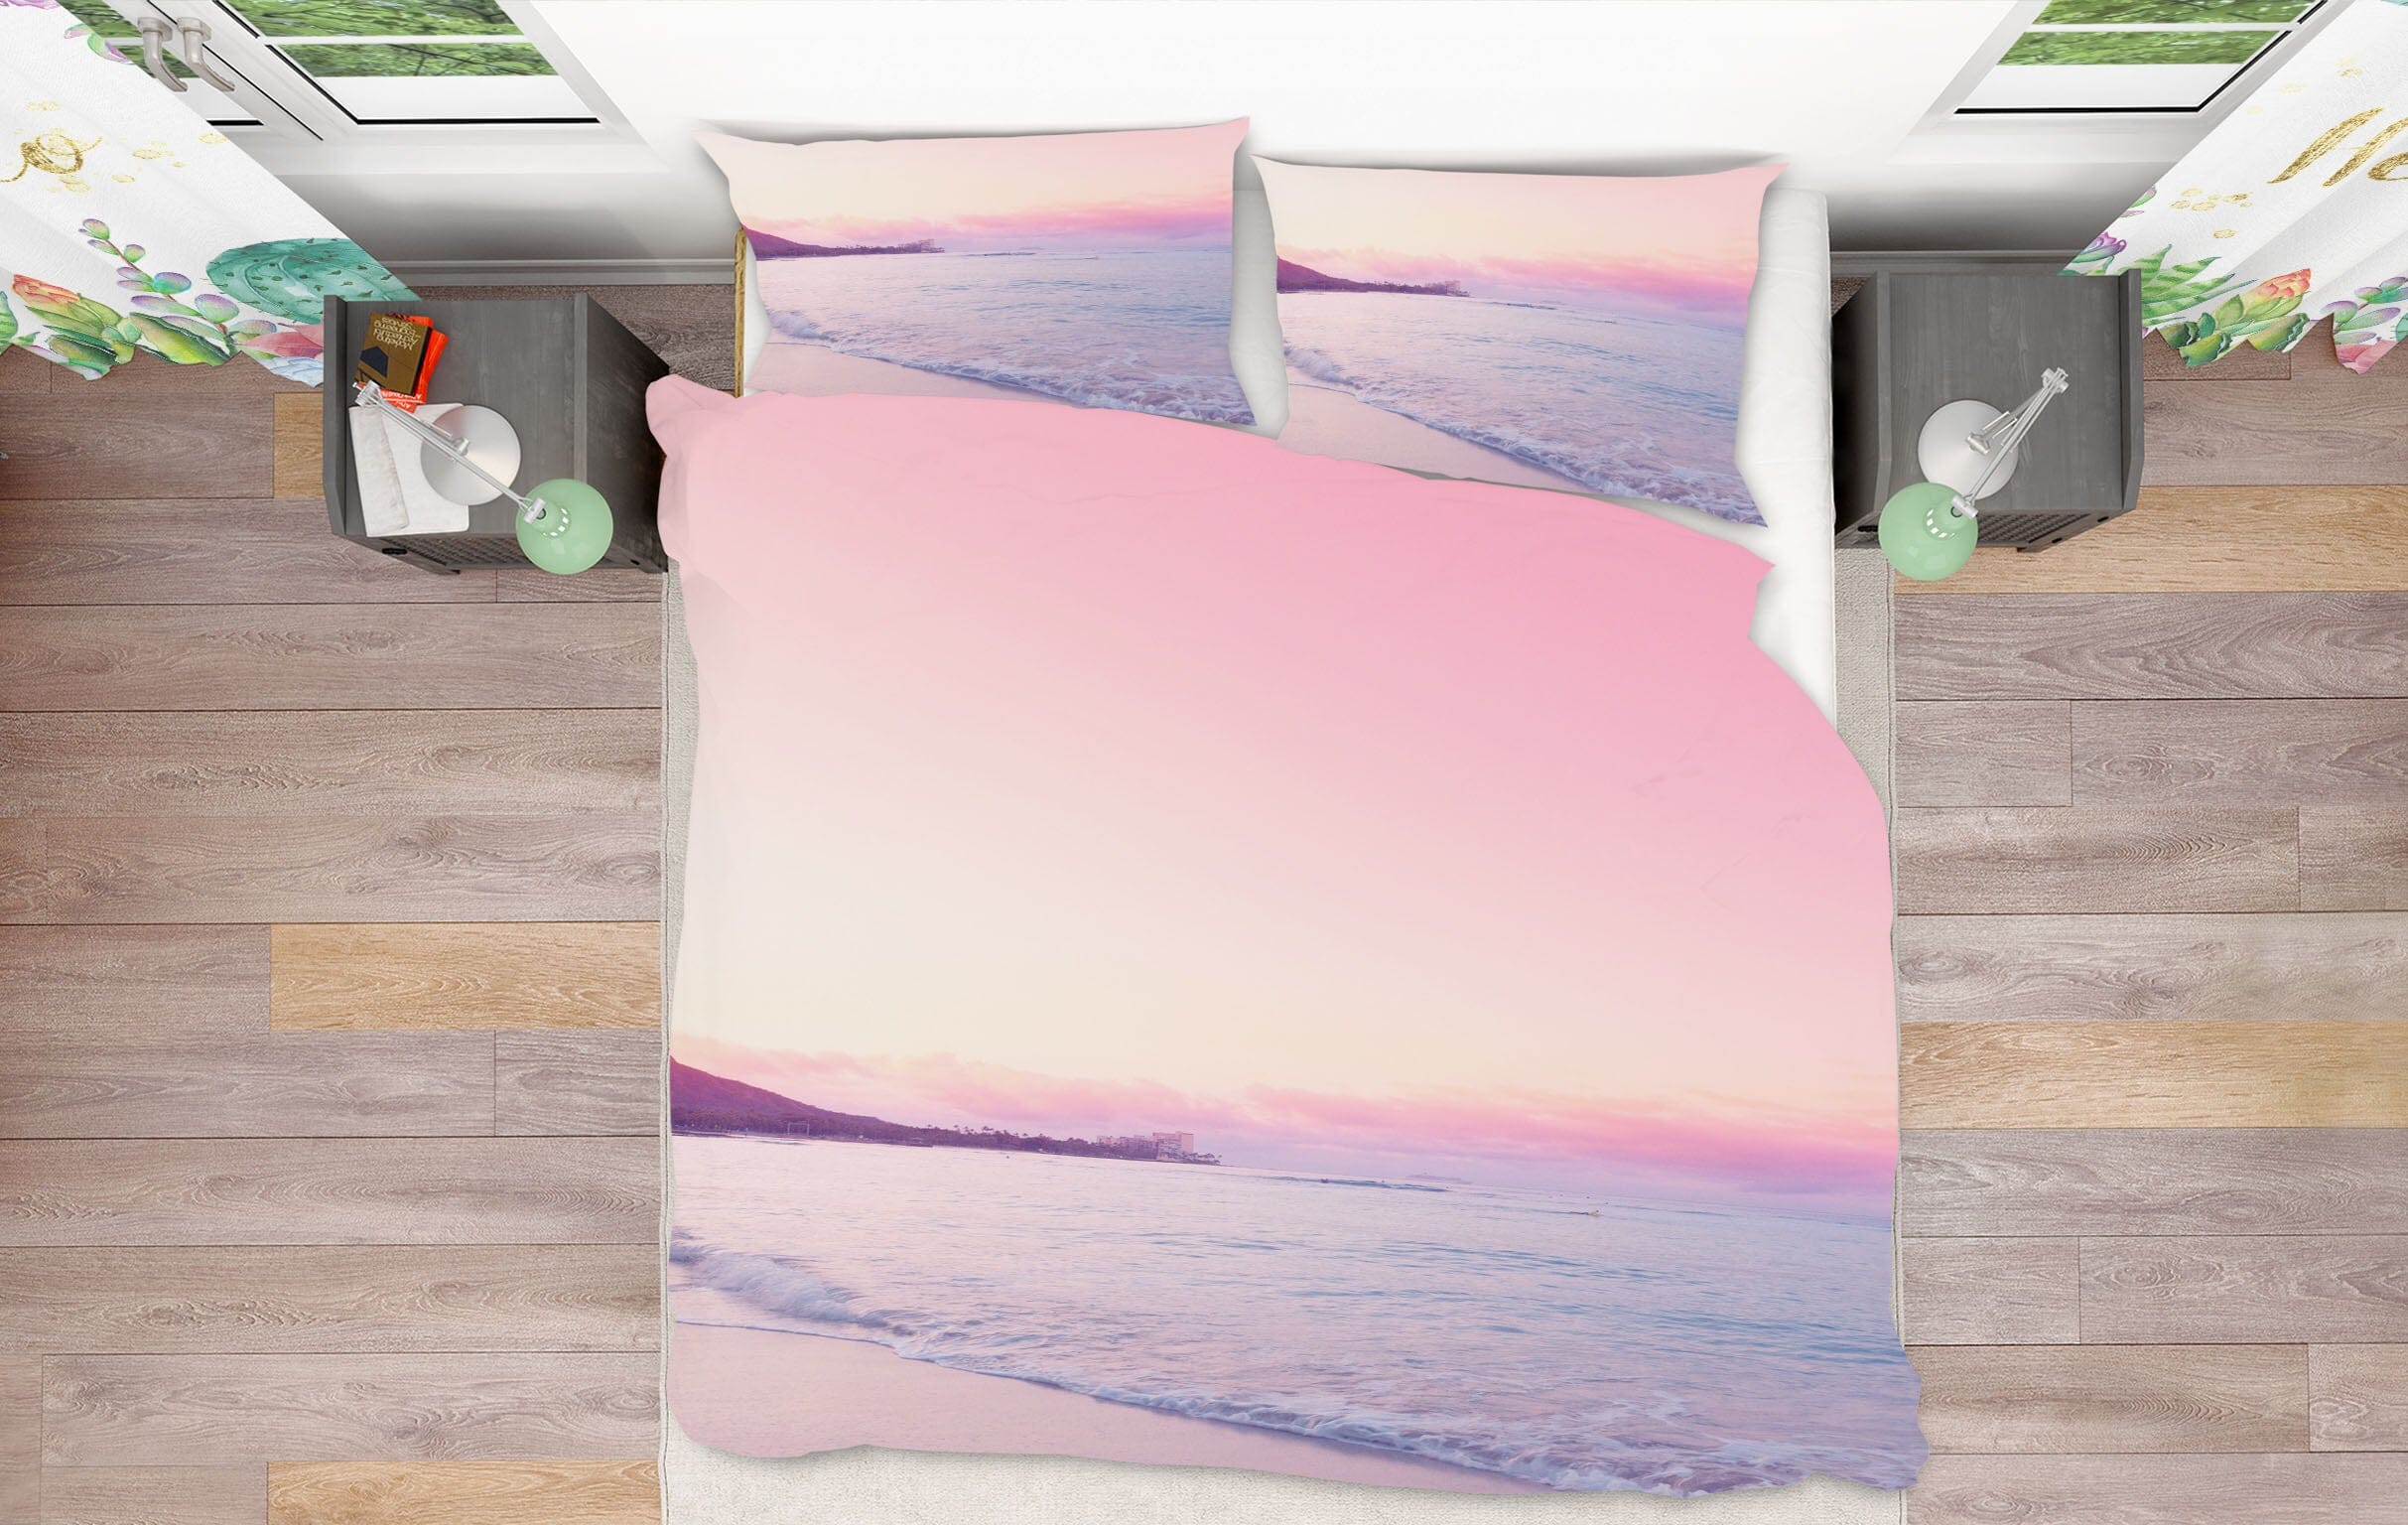 3D Pink Sunset 2018 Noirblanc777 Bedding Bed Pillowcases Quilt Quiet Covers AJ Creativity Home 